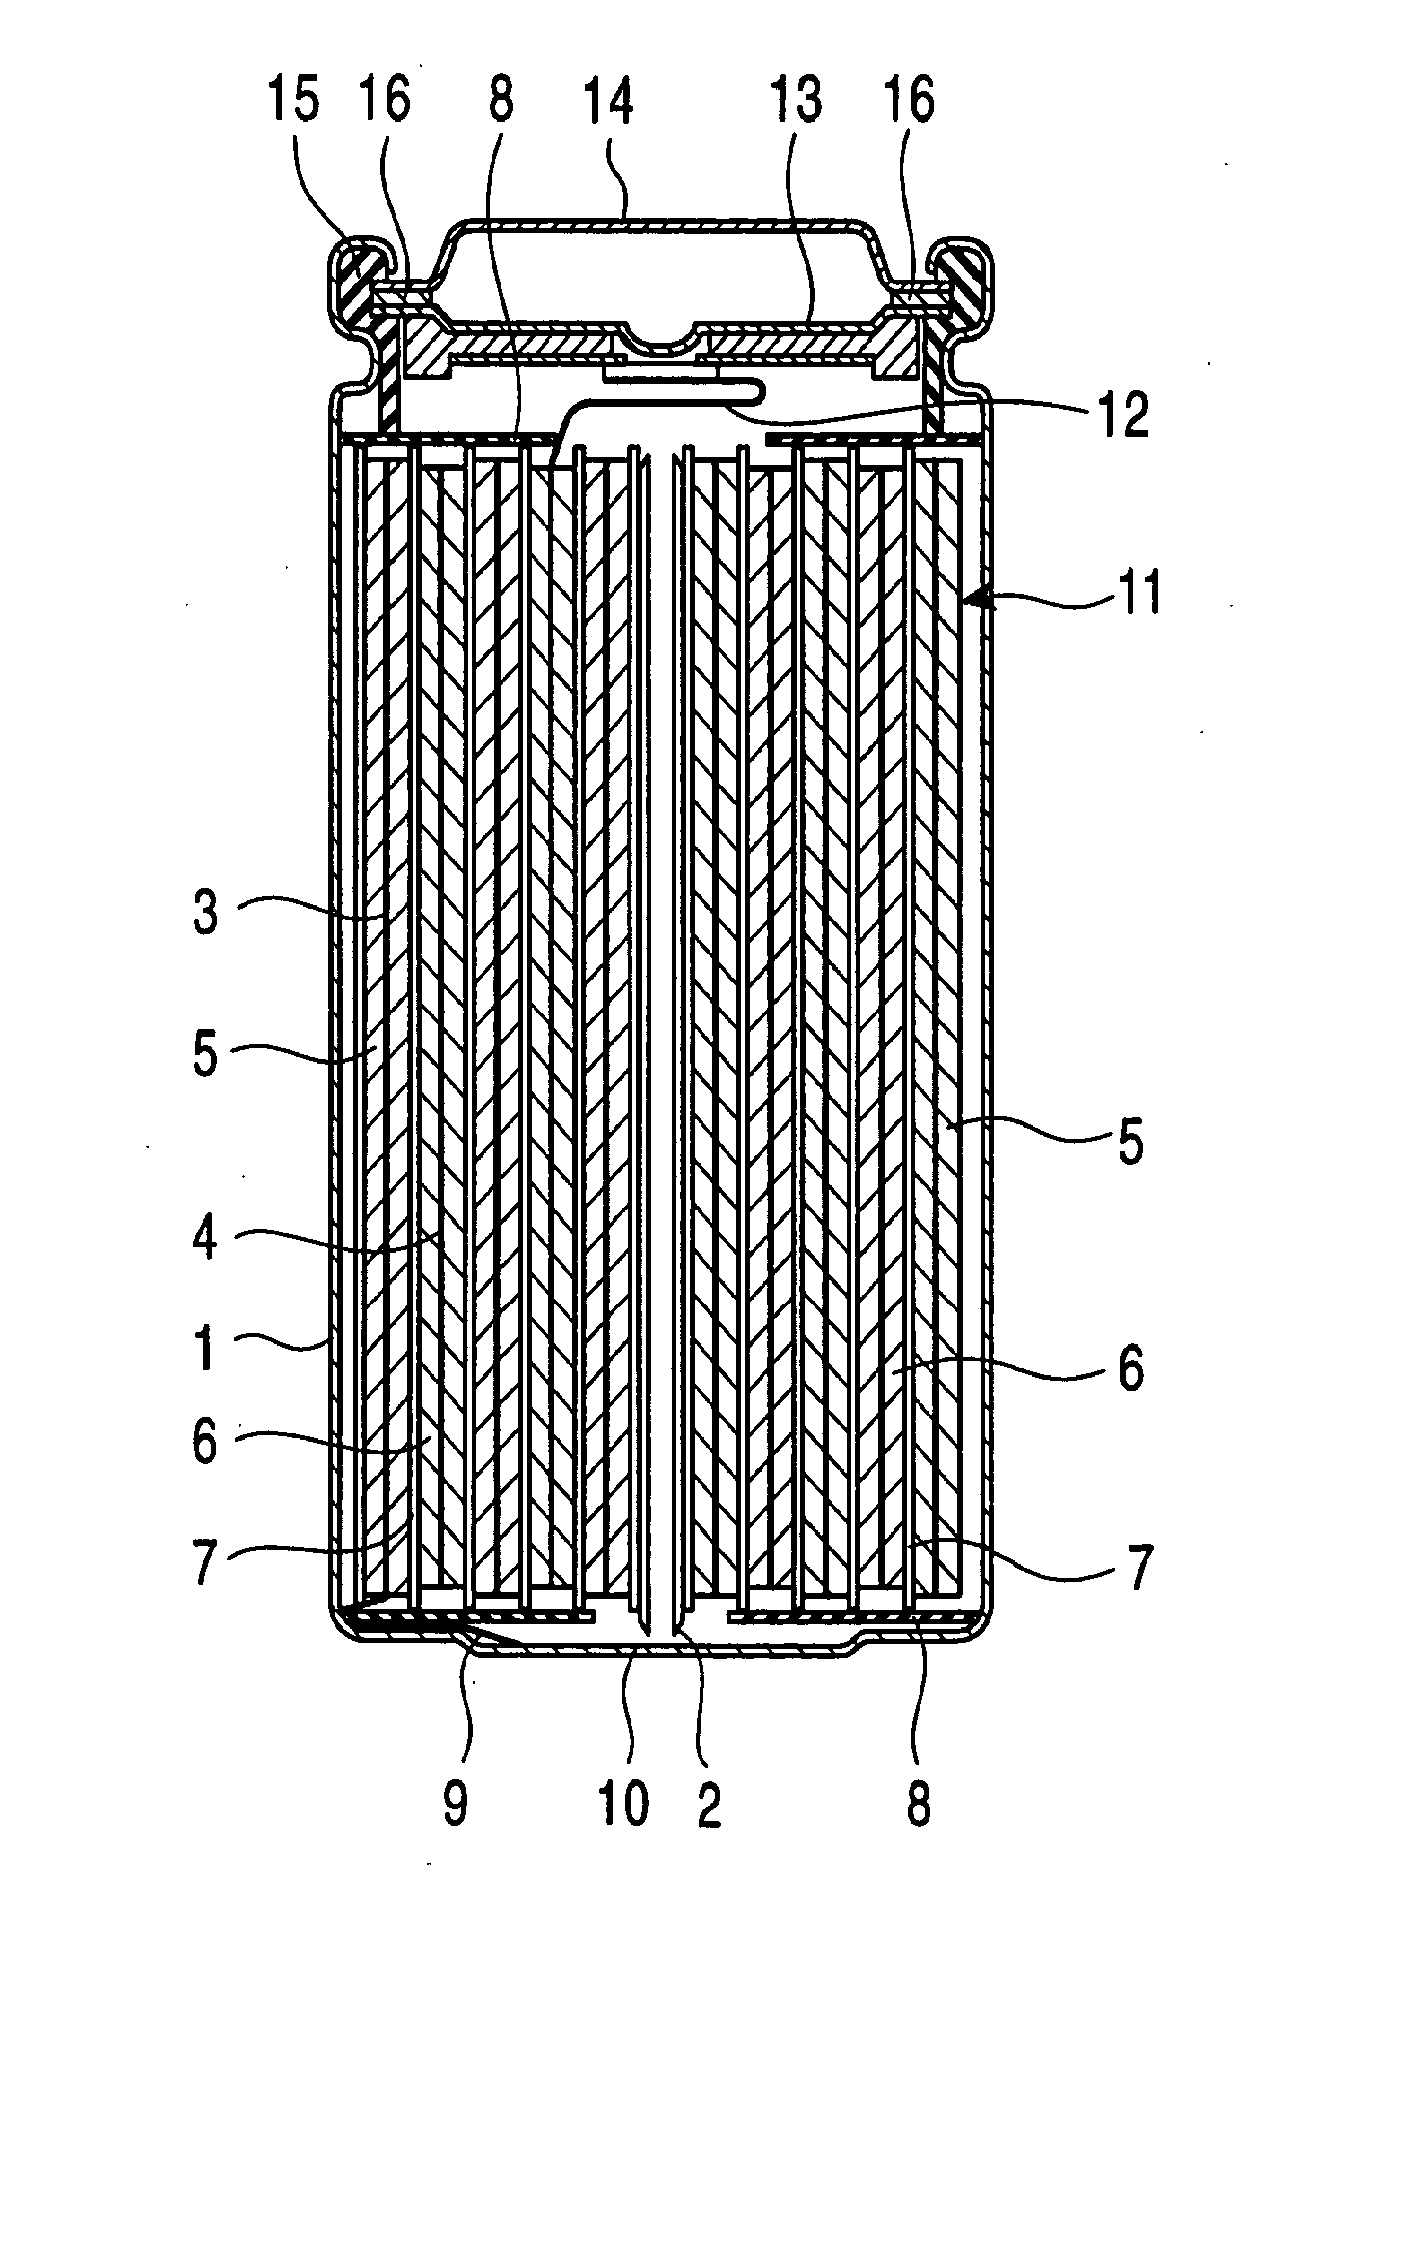 Non-aqueous electrolyte secondary battery having a negative electrode containing carbon fibers and carbon flakes